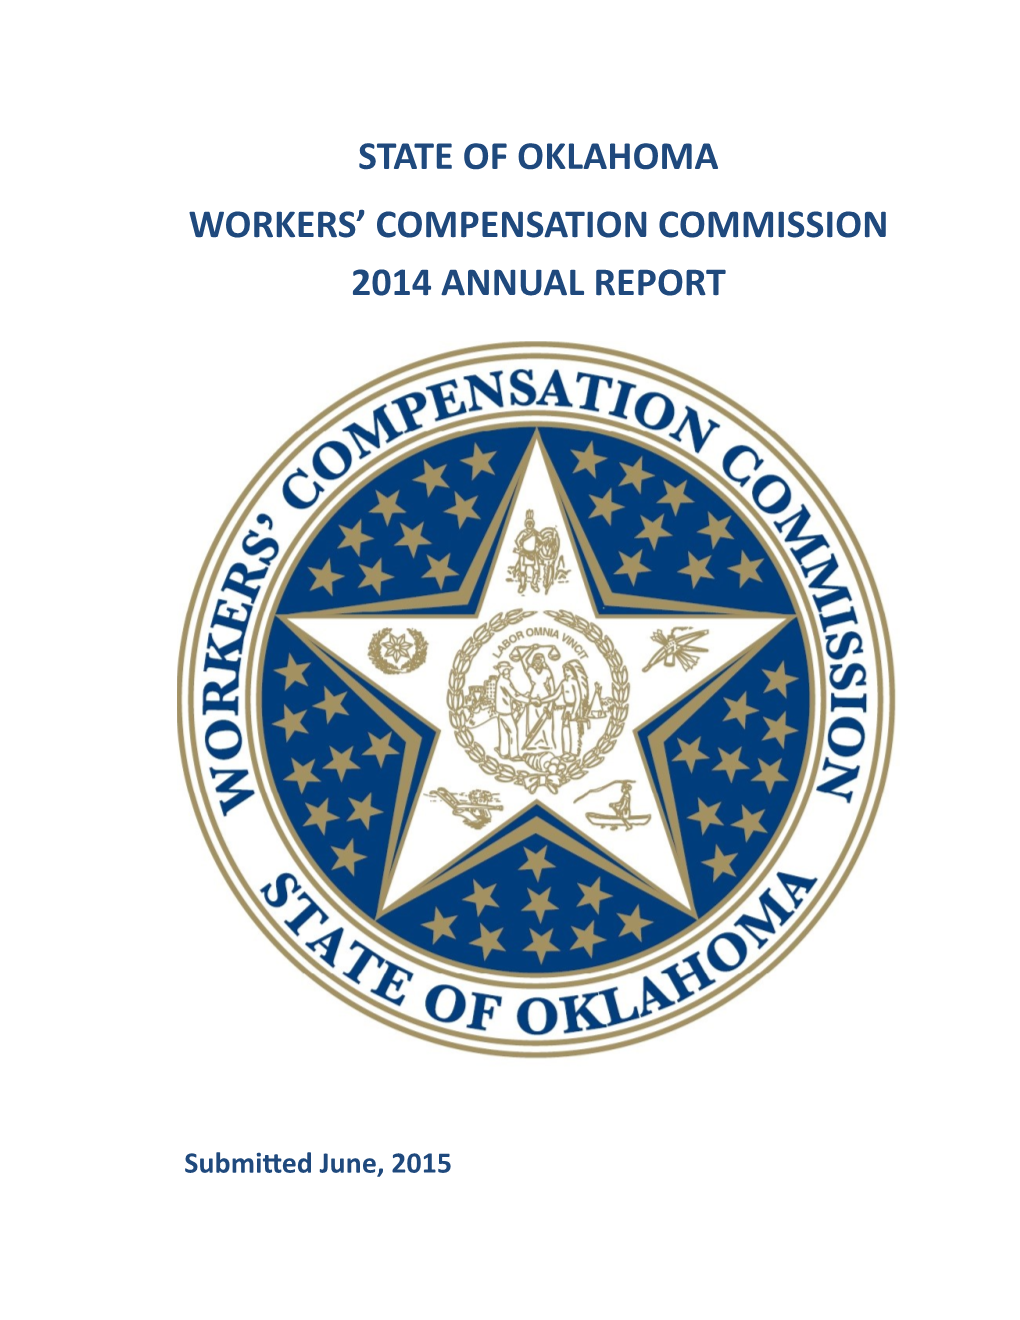 Workers' Compensation Commission 2014 Annual Report